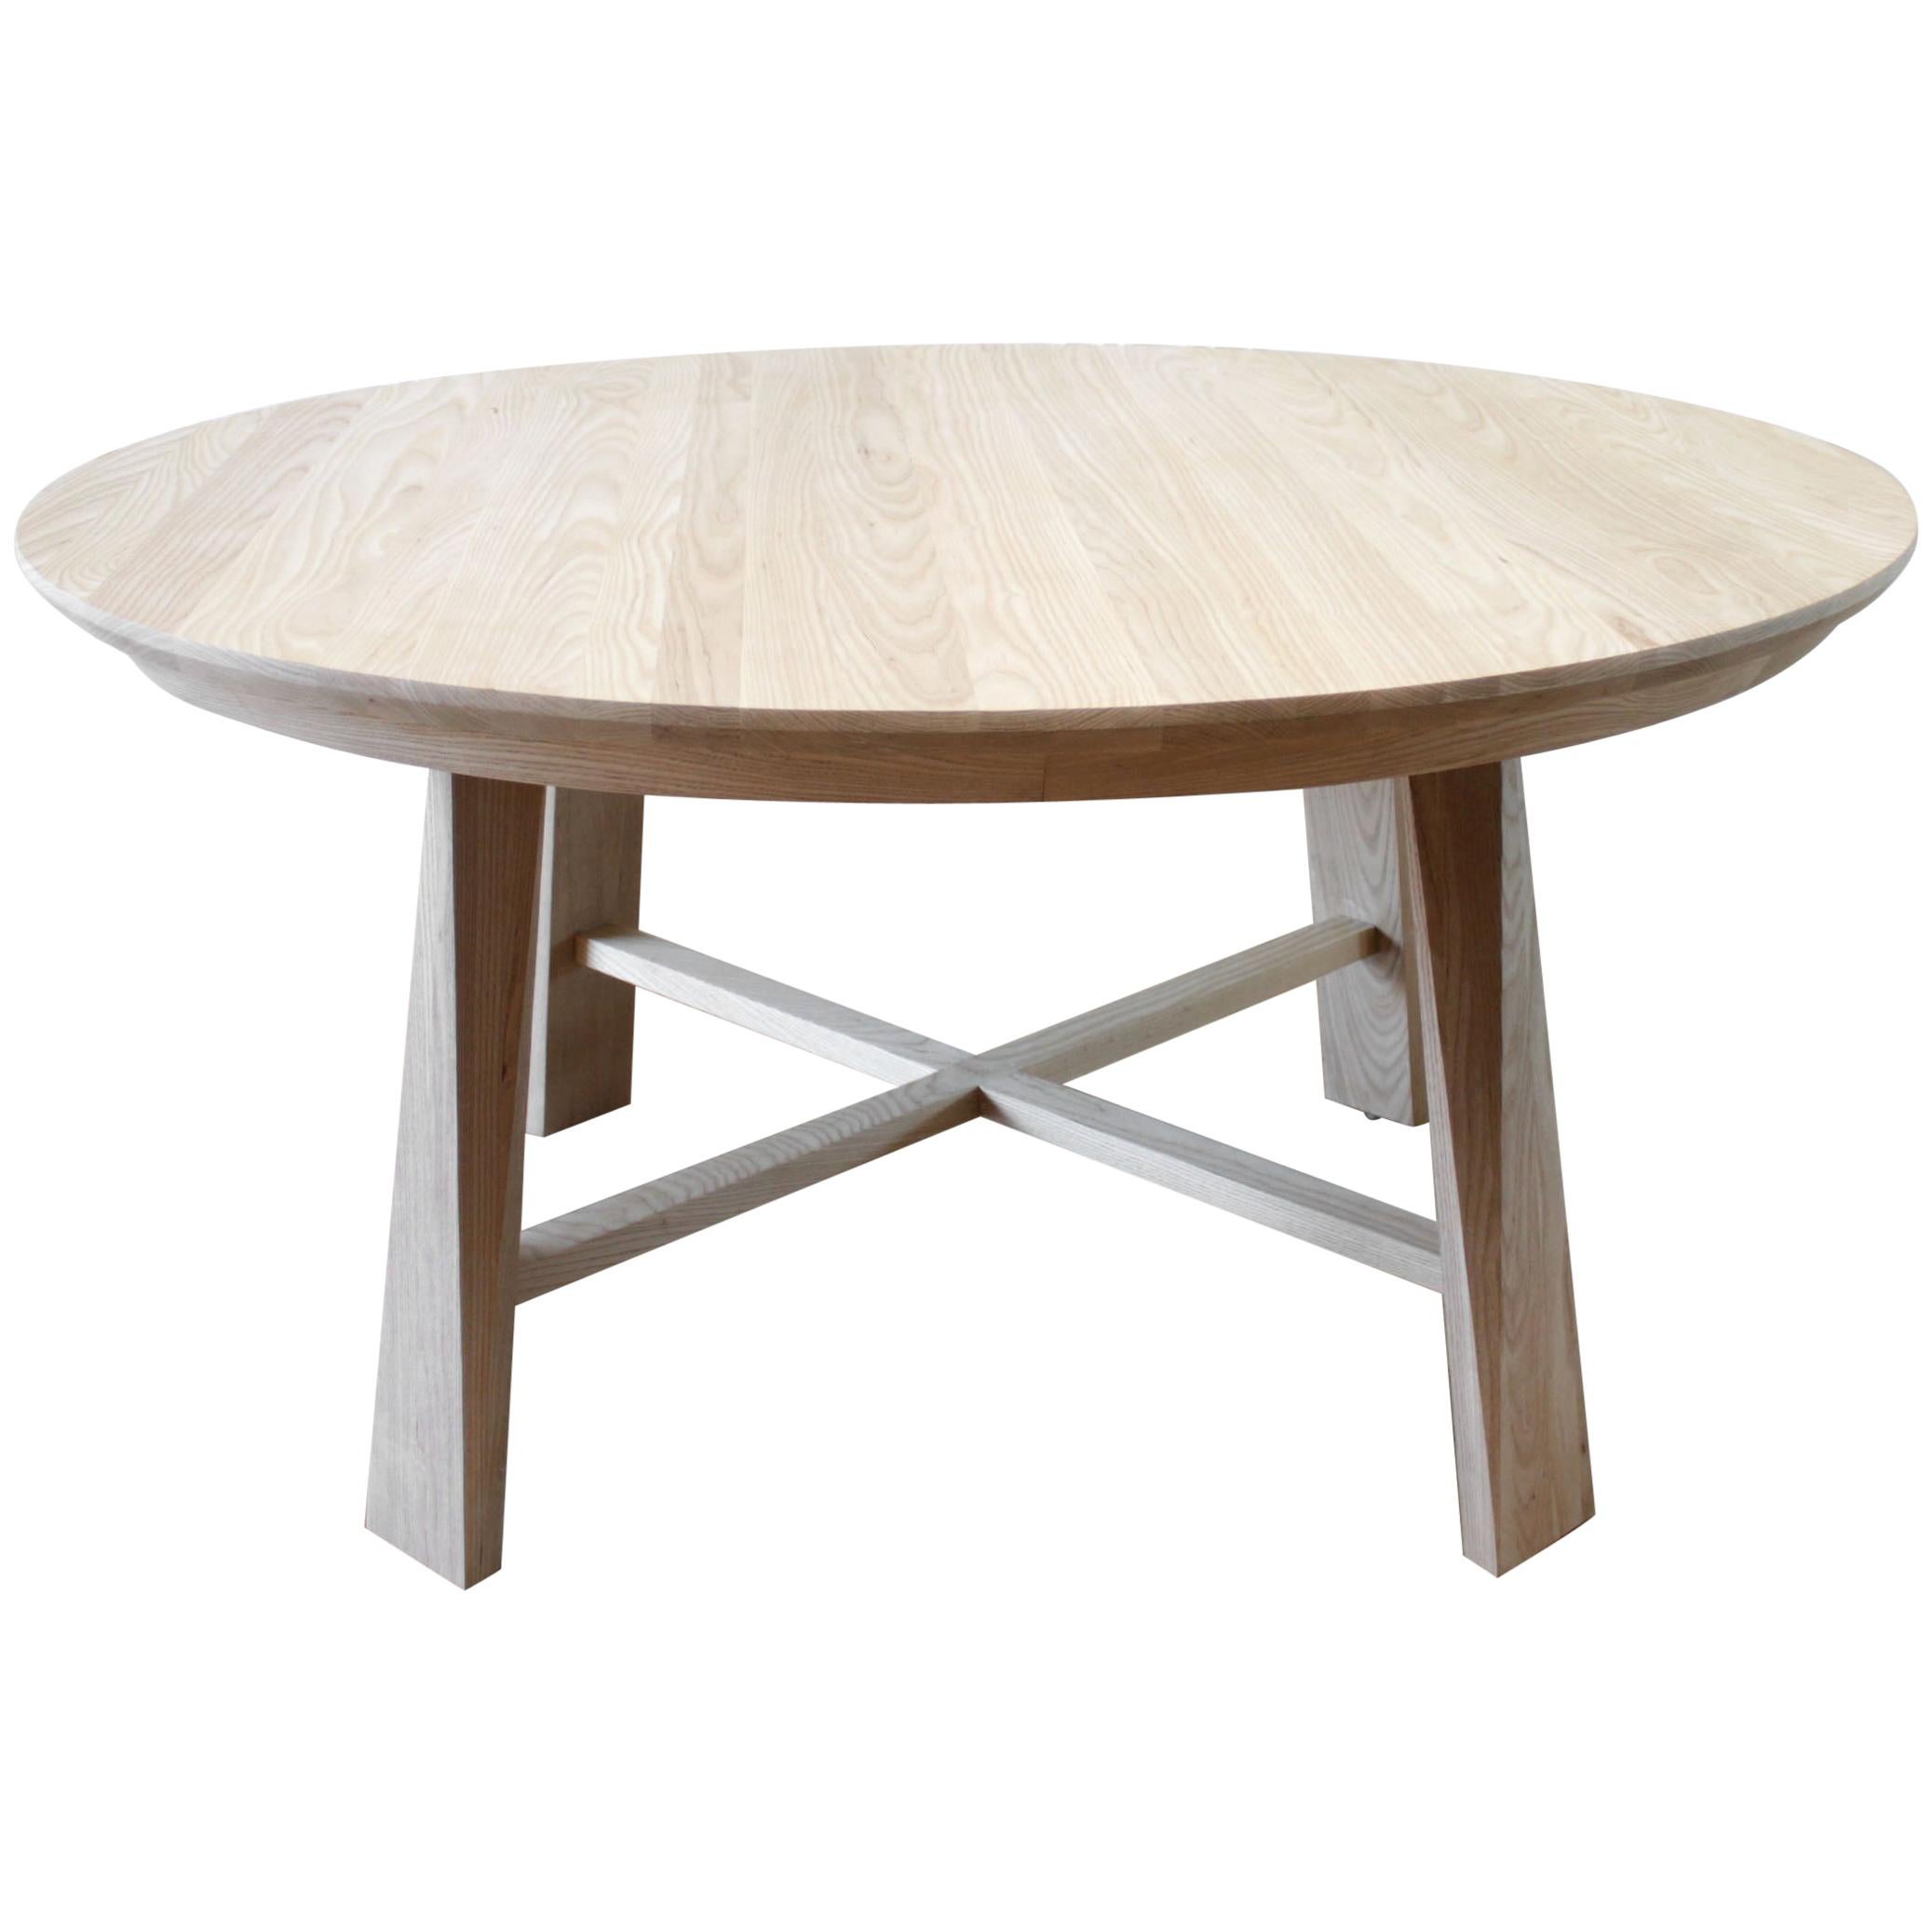 Custom Solid White Oak Round Dining Table